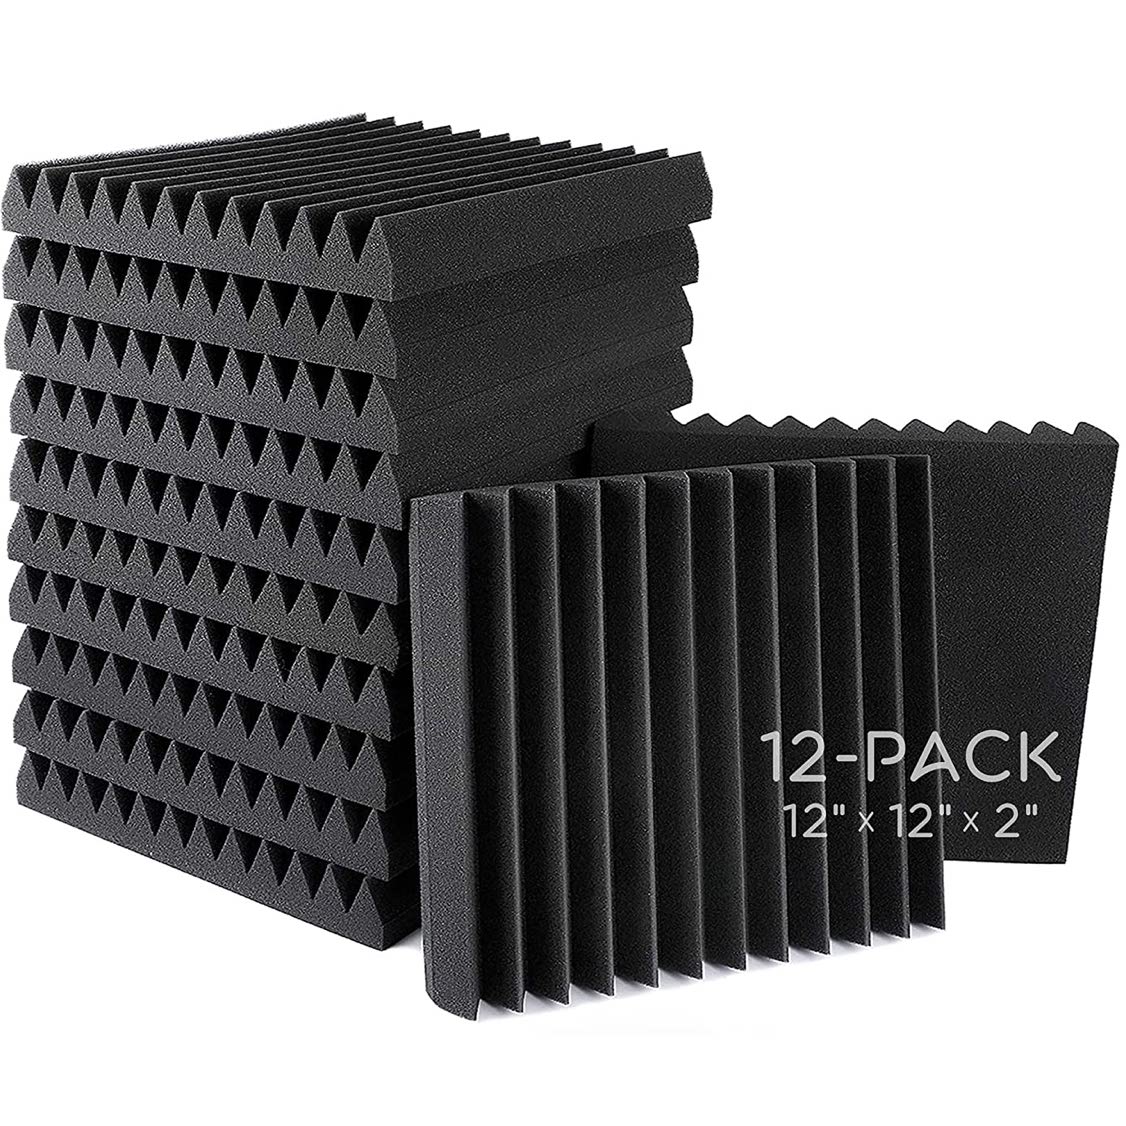  Mybecca 2 PACK Large Eggcrate Acoustic Foam Sound Proof Foam  Panels Nosie Dampening Foam Studio Music Eq, Studio Soundproofing Wall  Tiles 12 X 24 Inches, Made in USA - Color: Charcoal : Musical Instruments